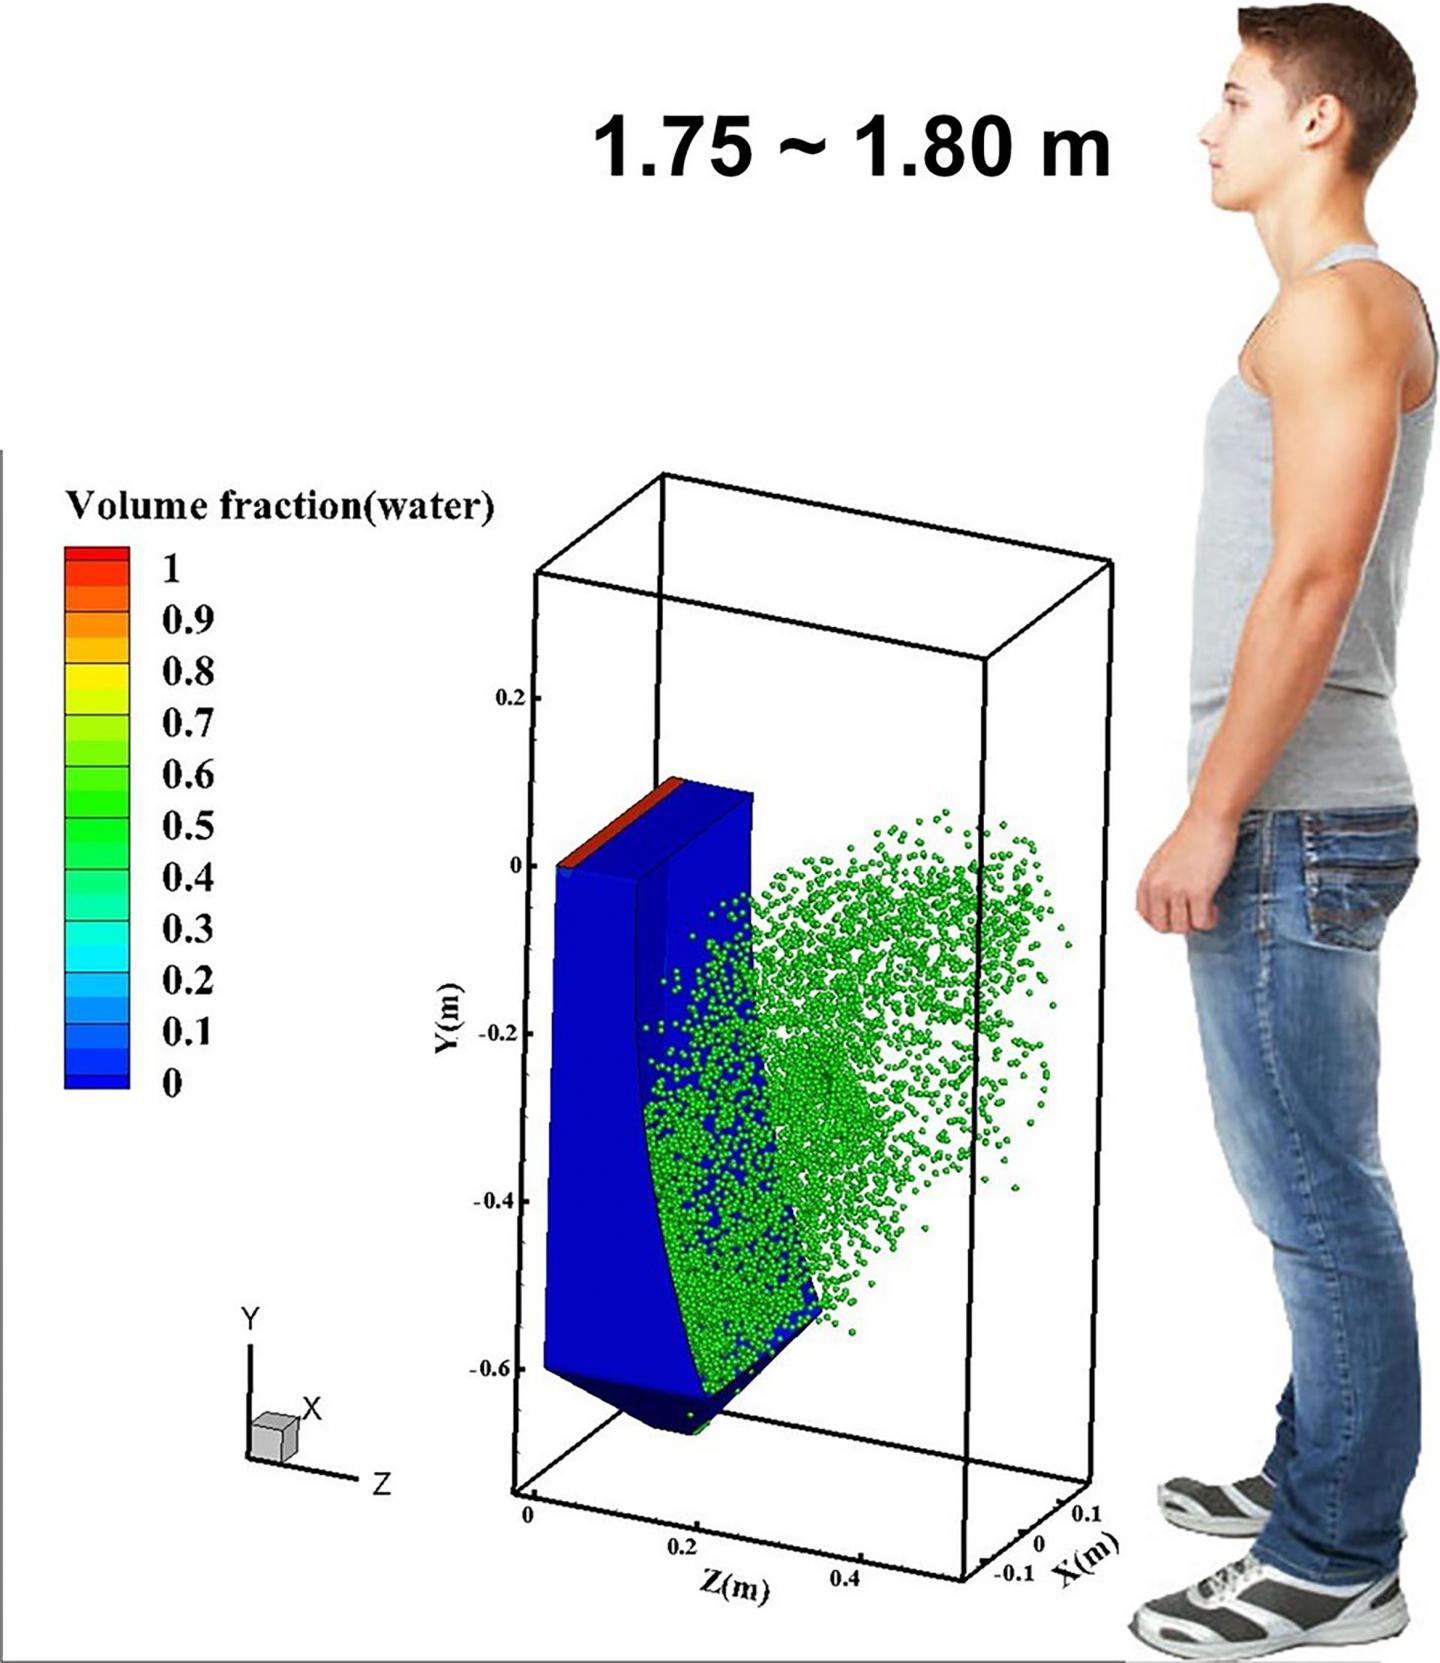 Discrete particle distribution of urinal flushing